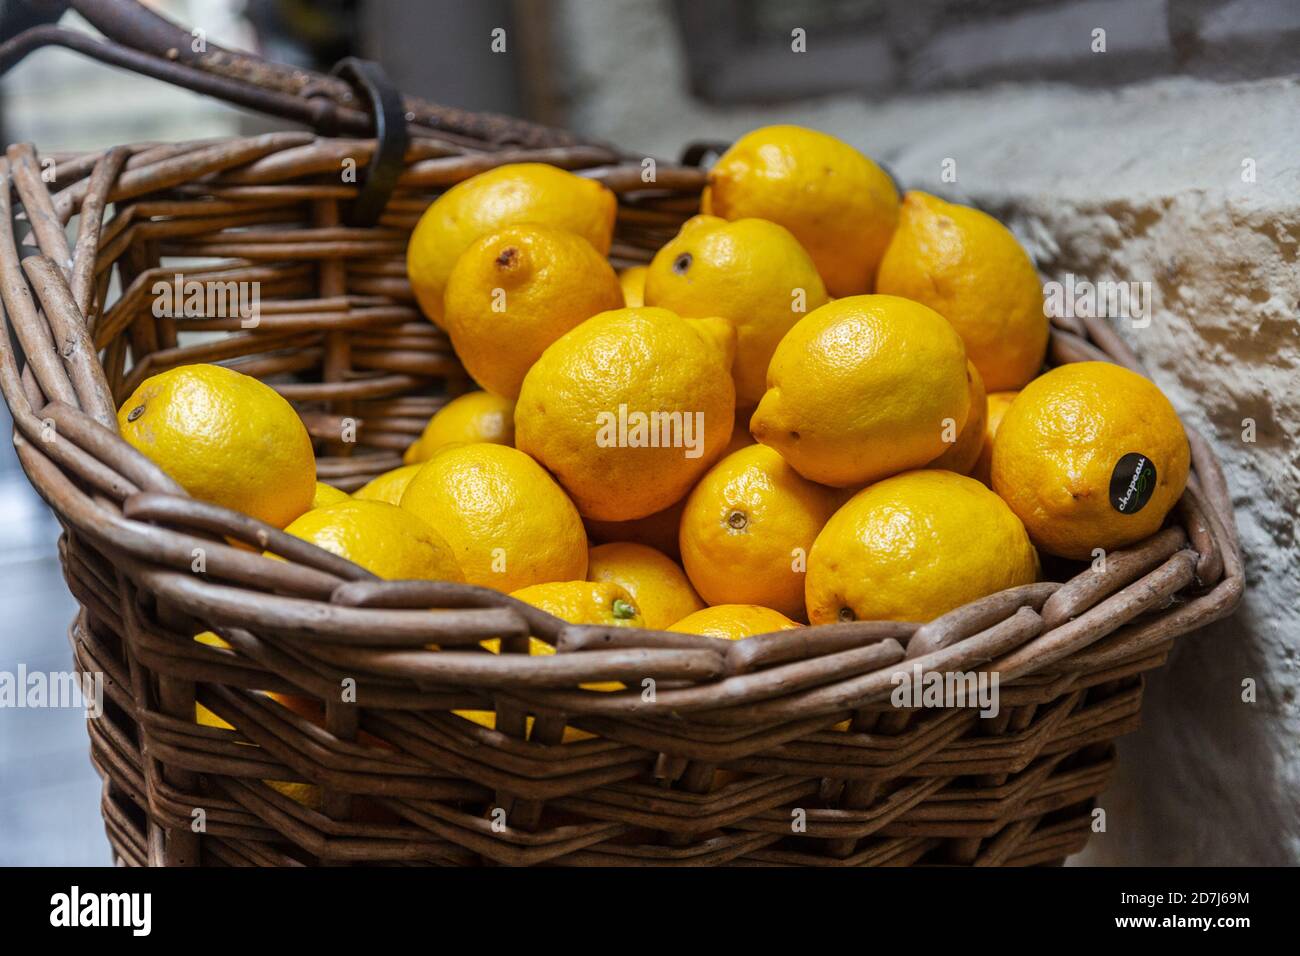 Lemons in a bicycle basket Stock Photo